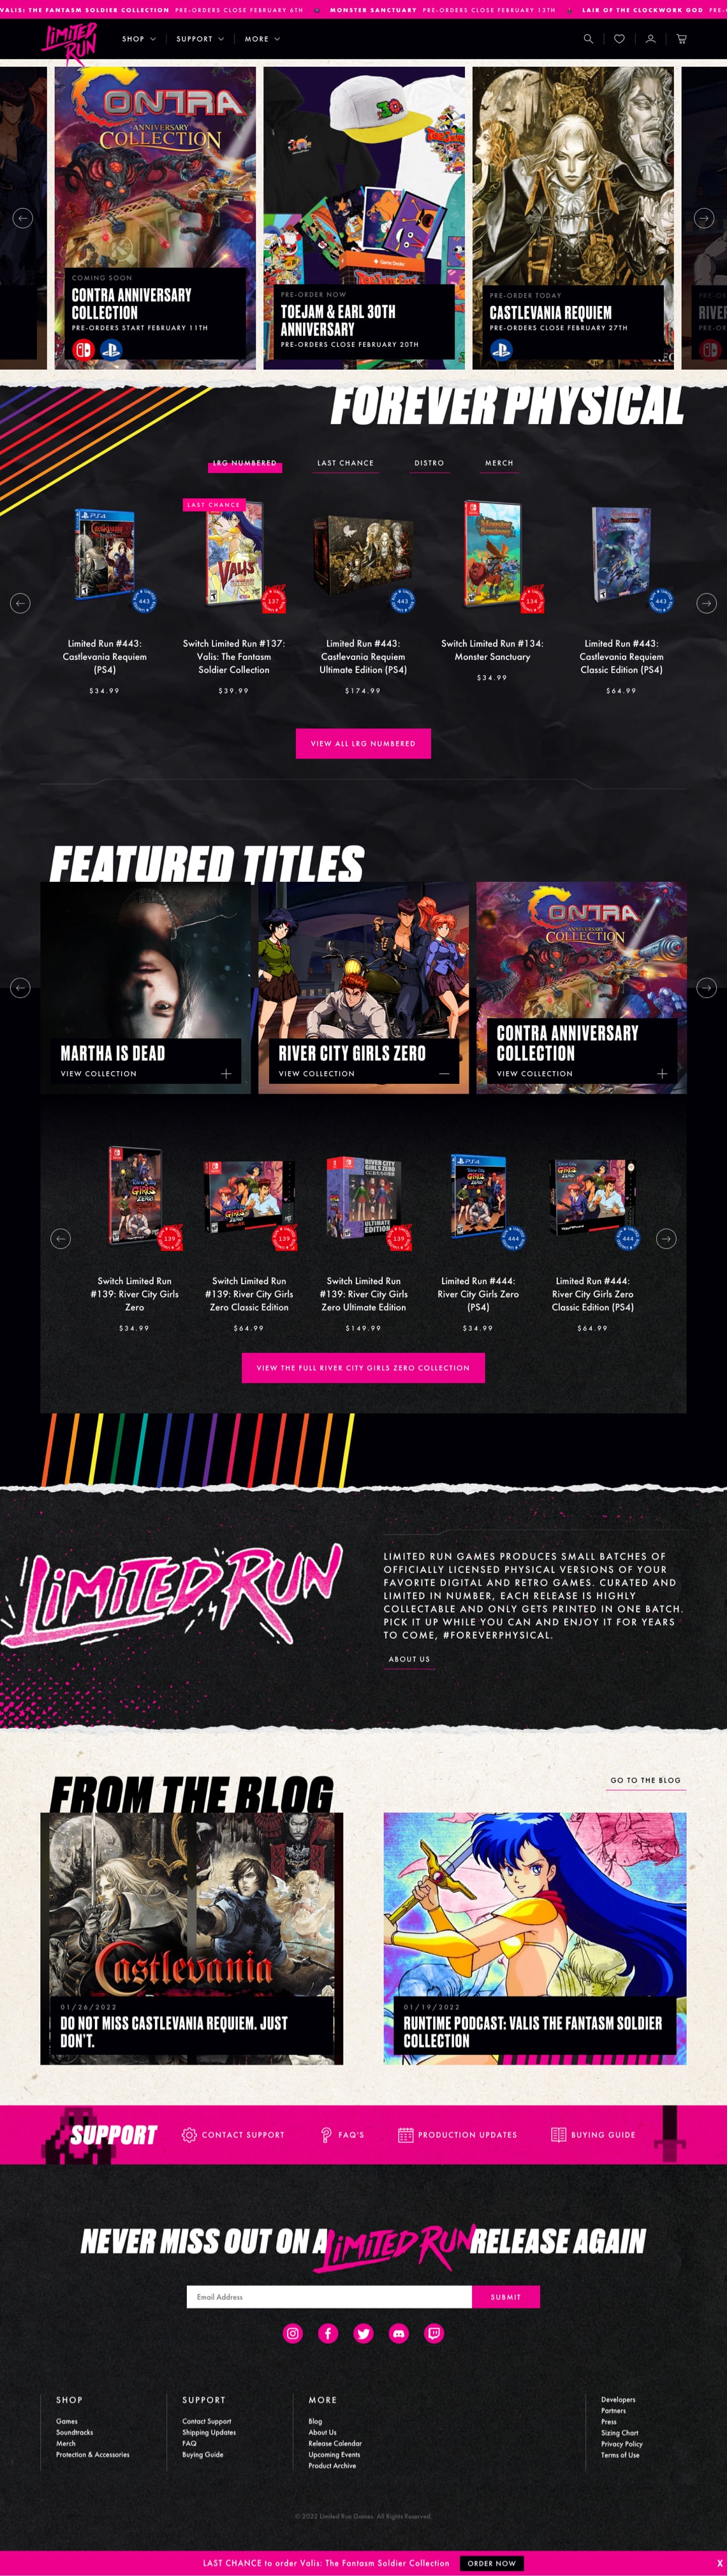 Limited Run Games - Homepage